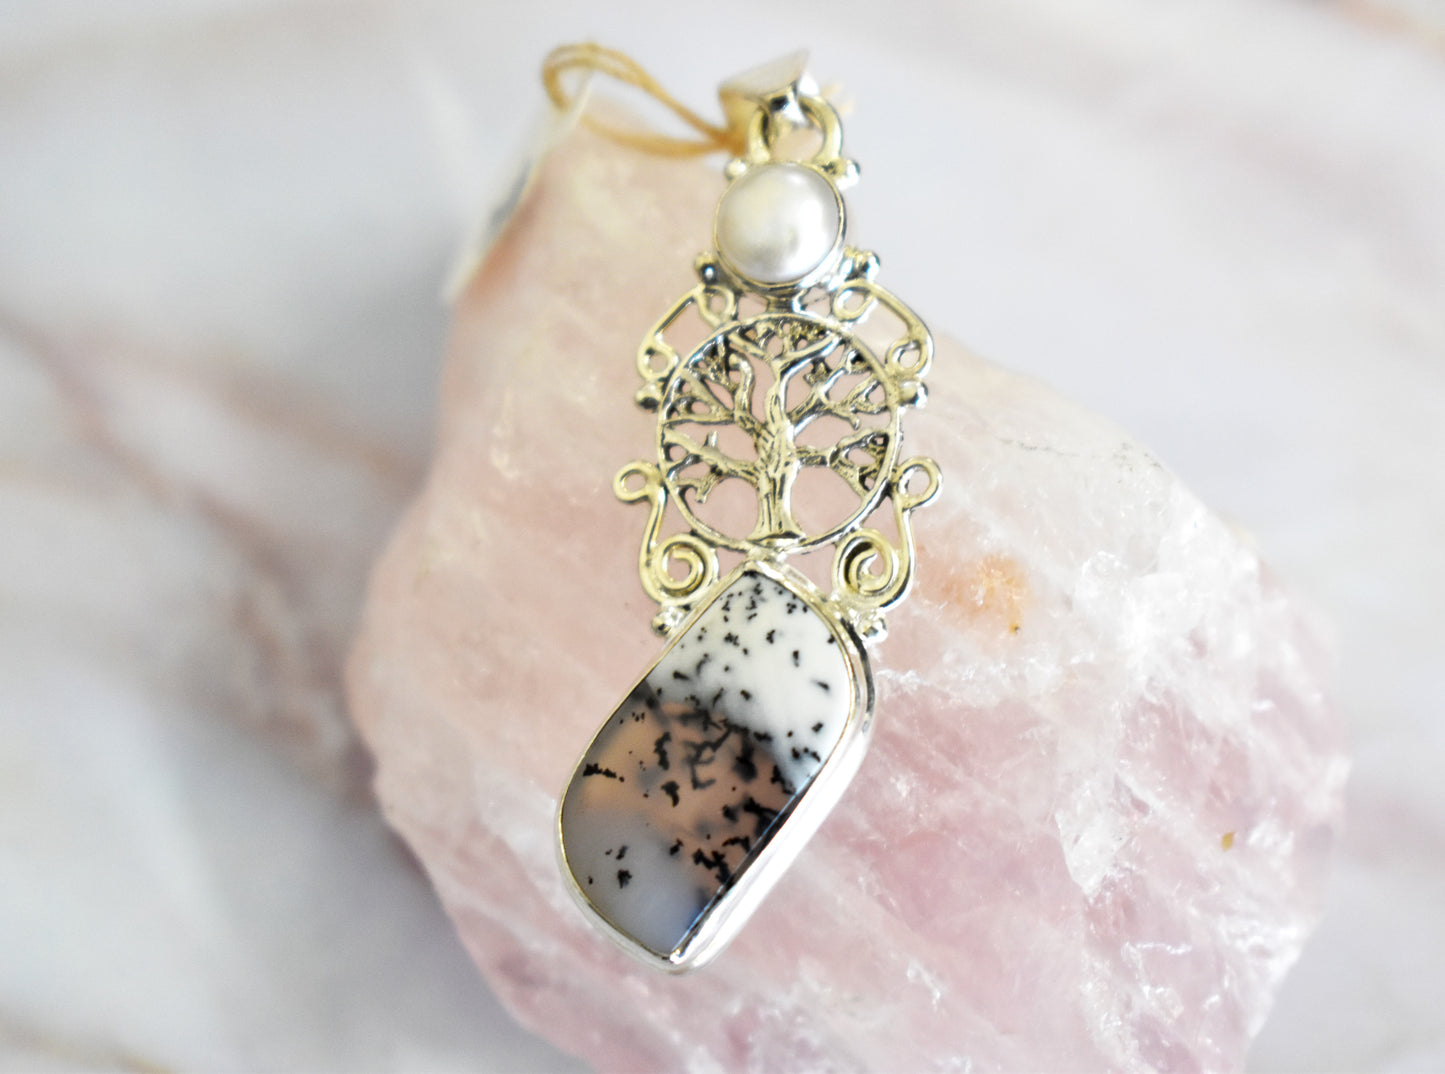 Dendritic Agate with Tree of Life Pendant